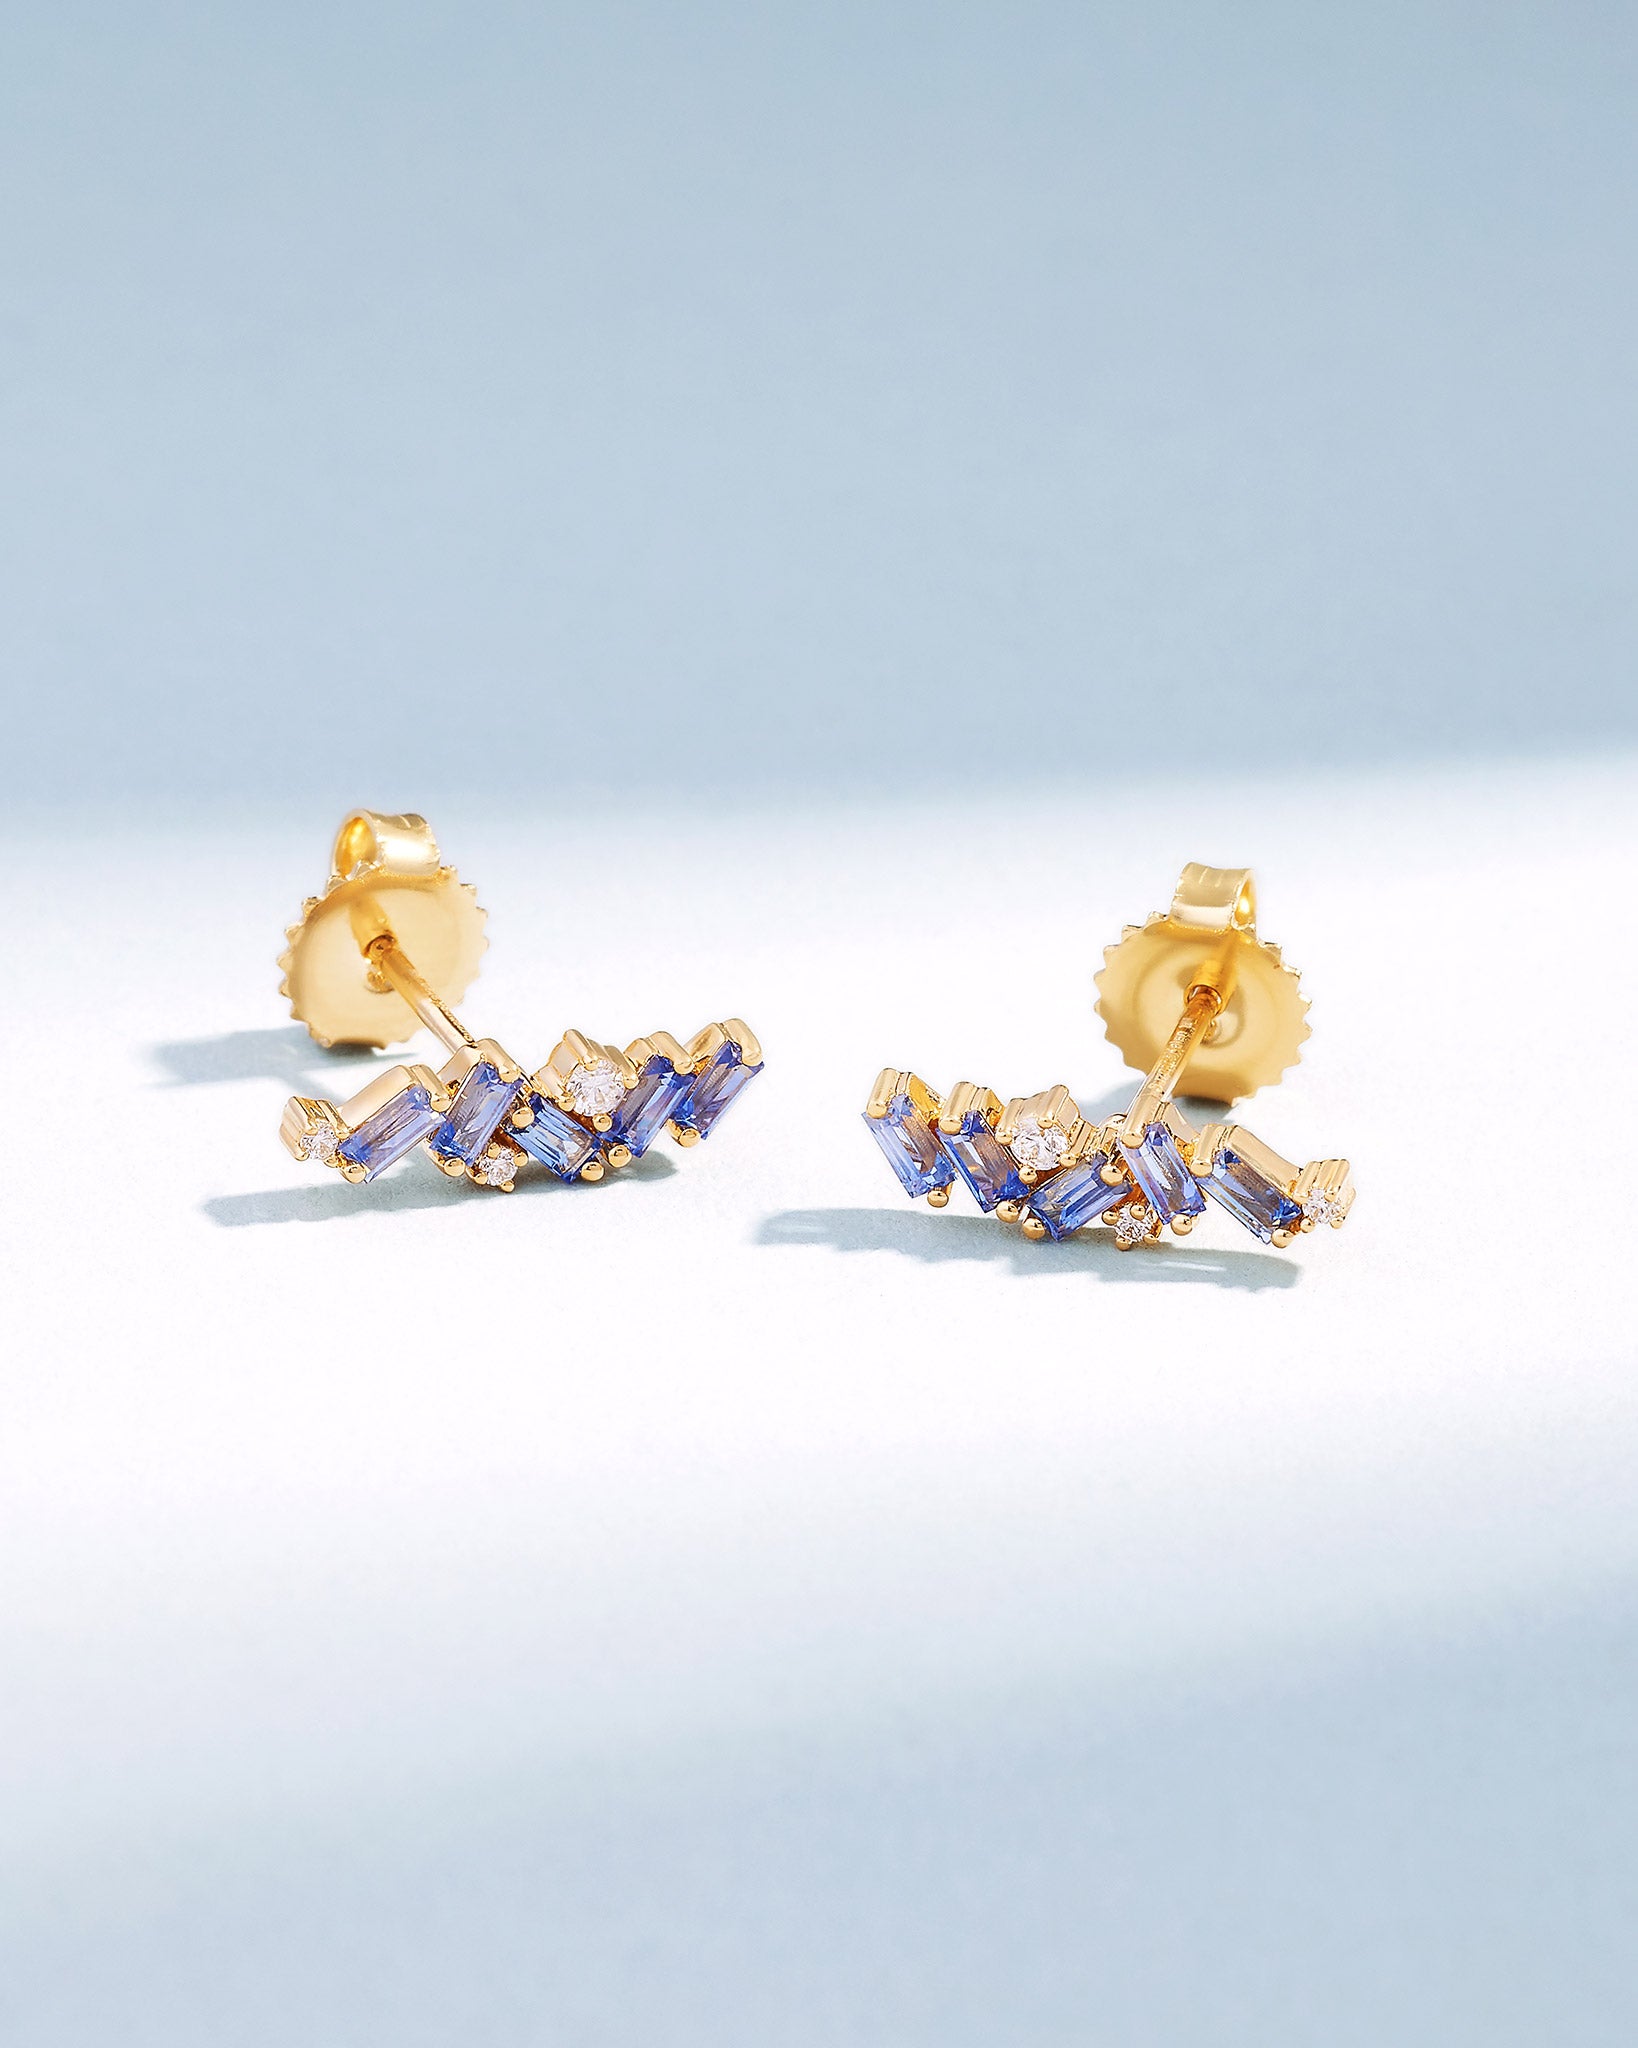 Suzanne Kalan Frenzy Light Blue Sapphire Studs in 18k yellow gold